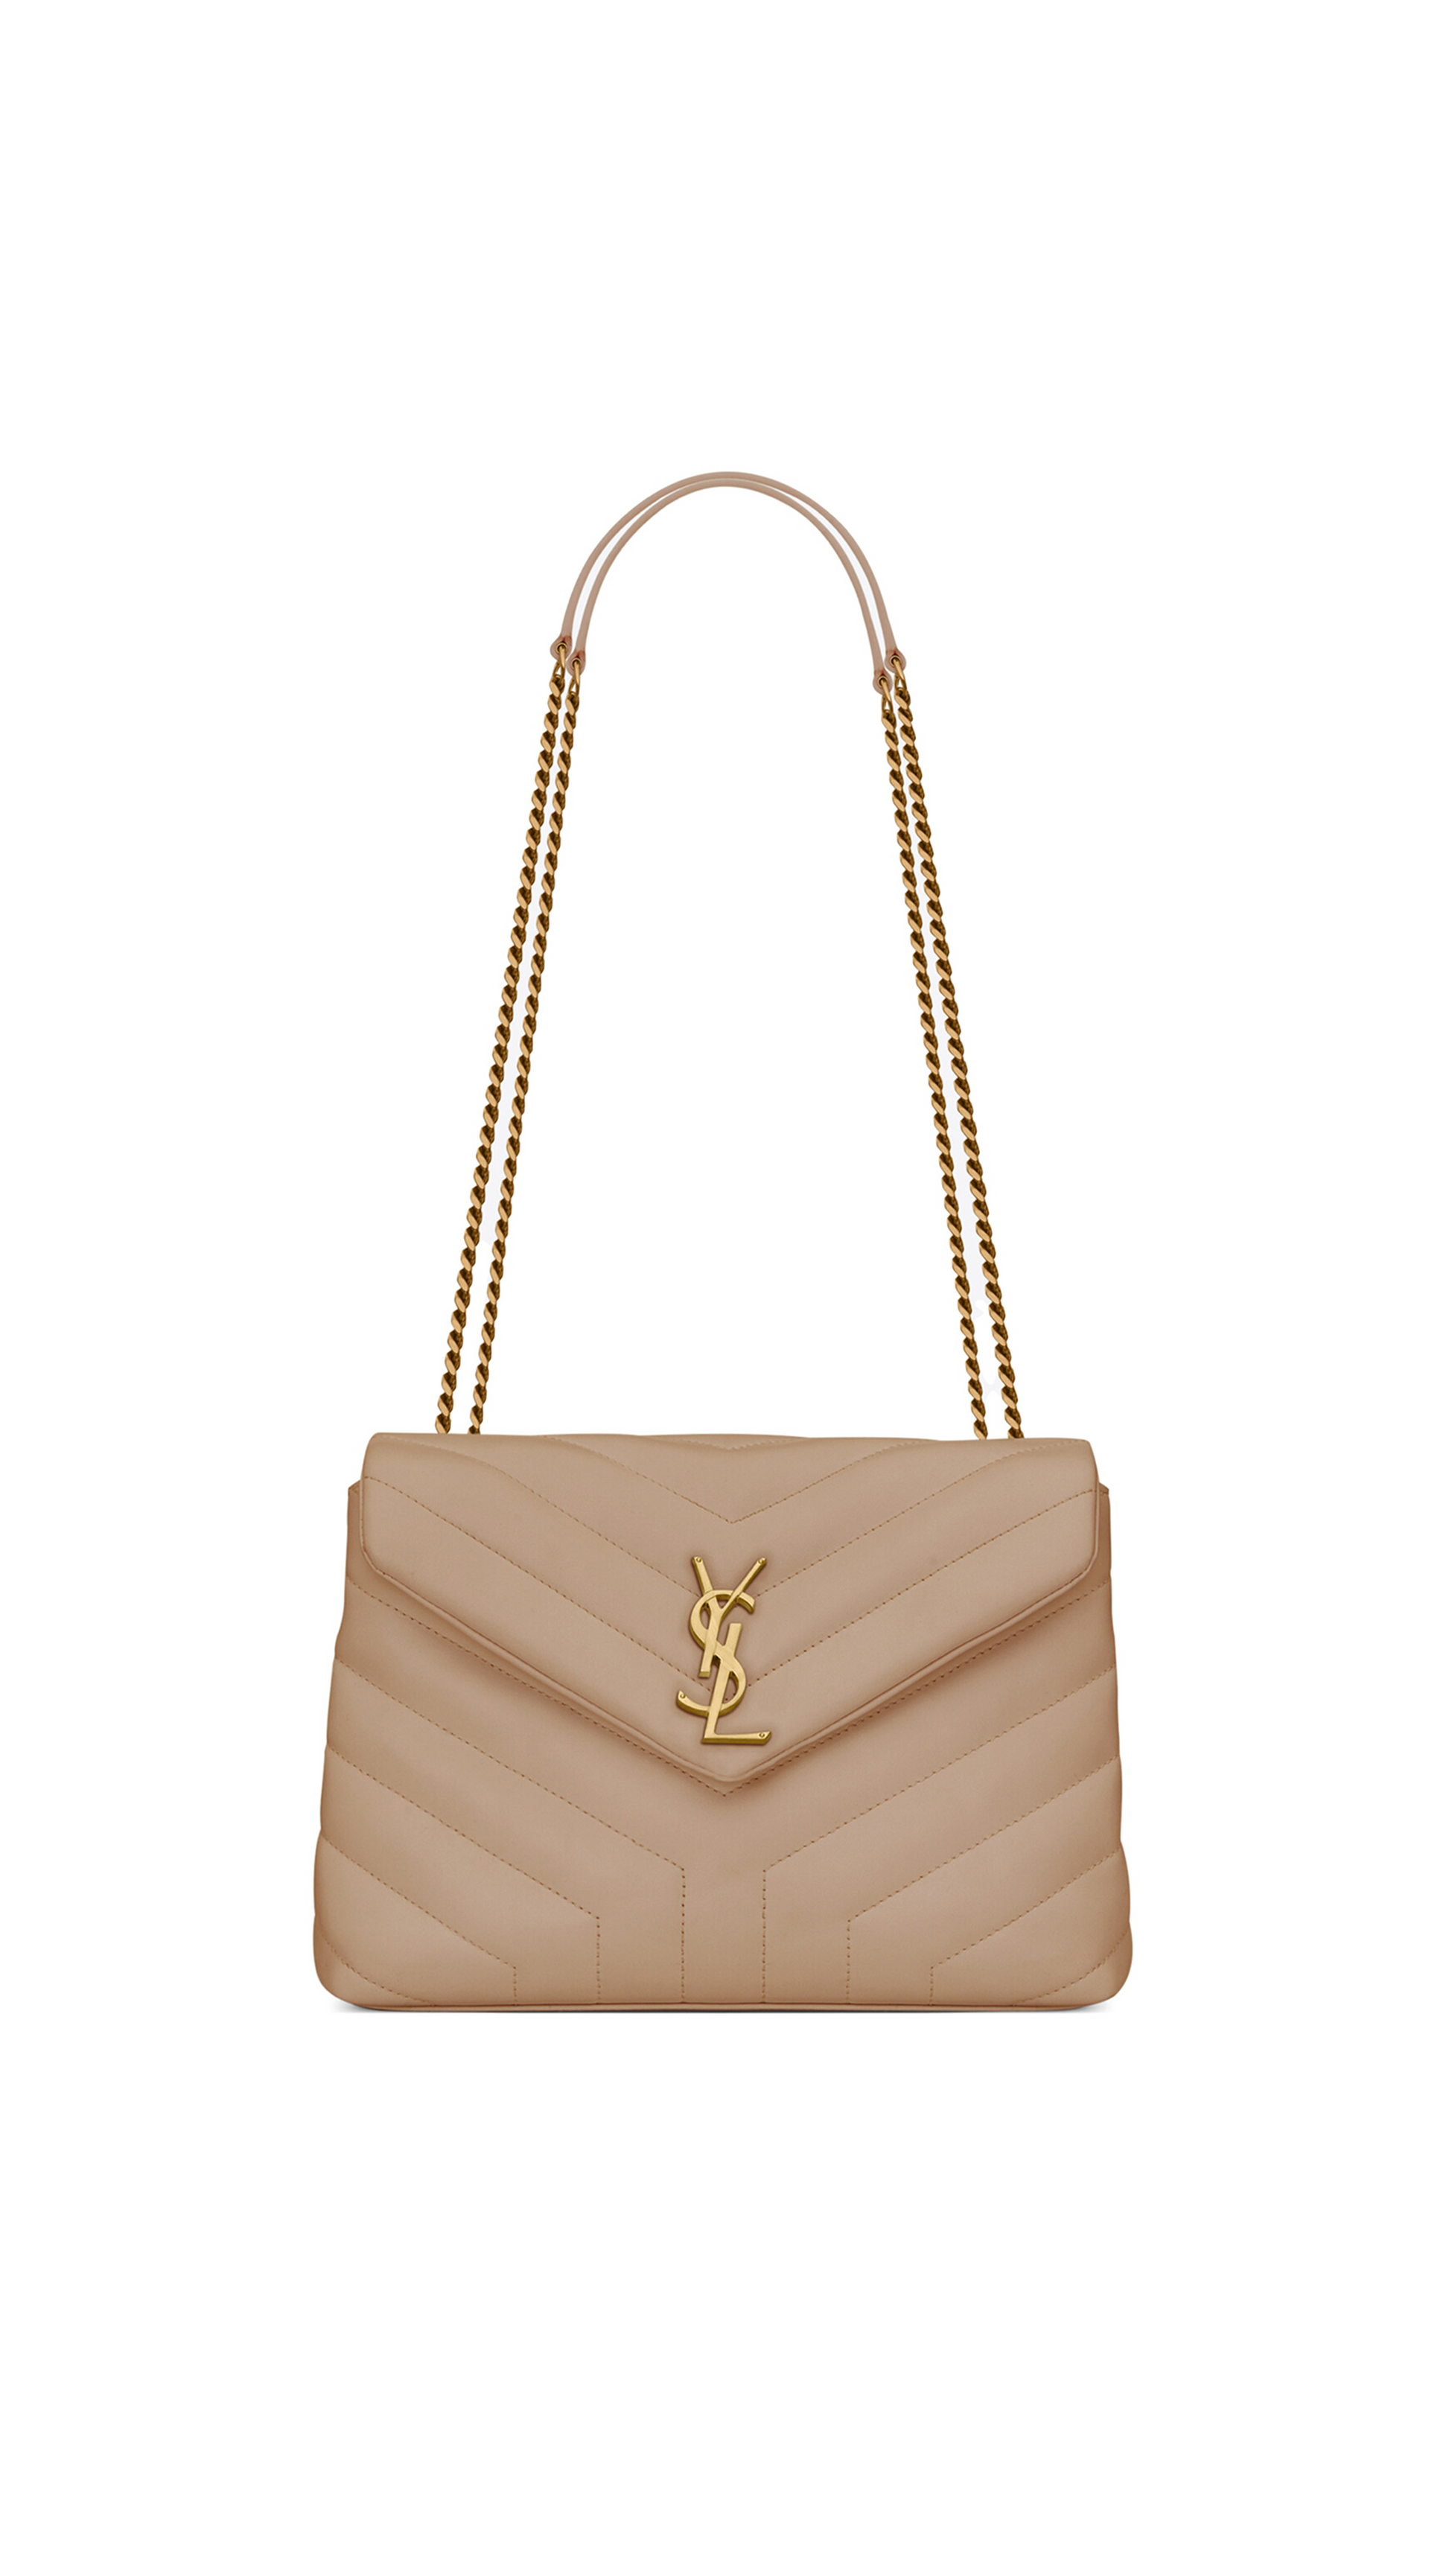 Loulou leather crossbody bag Saint Laurent Beige in Leather - 37584910